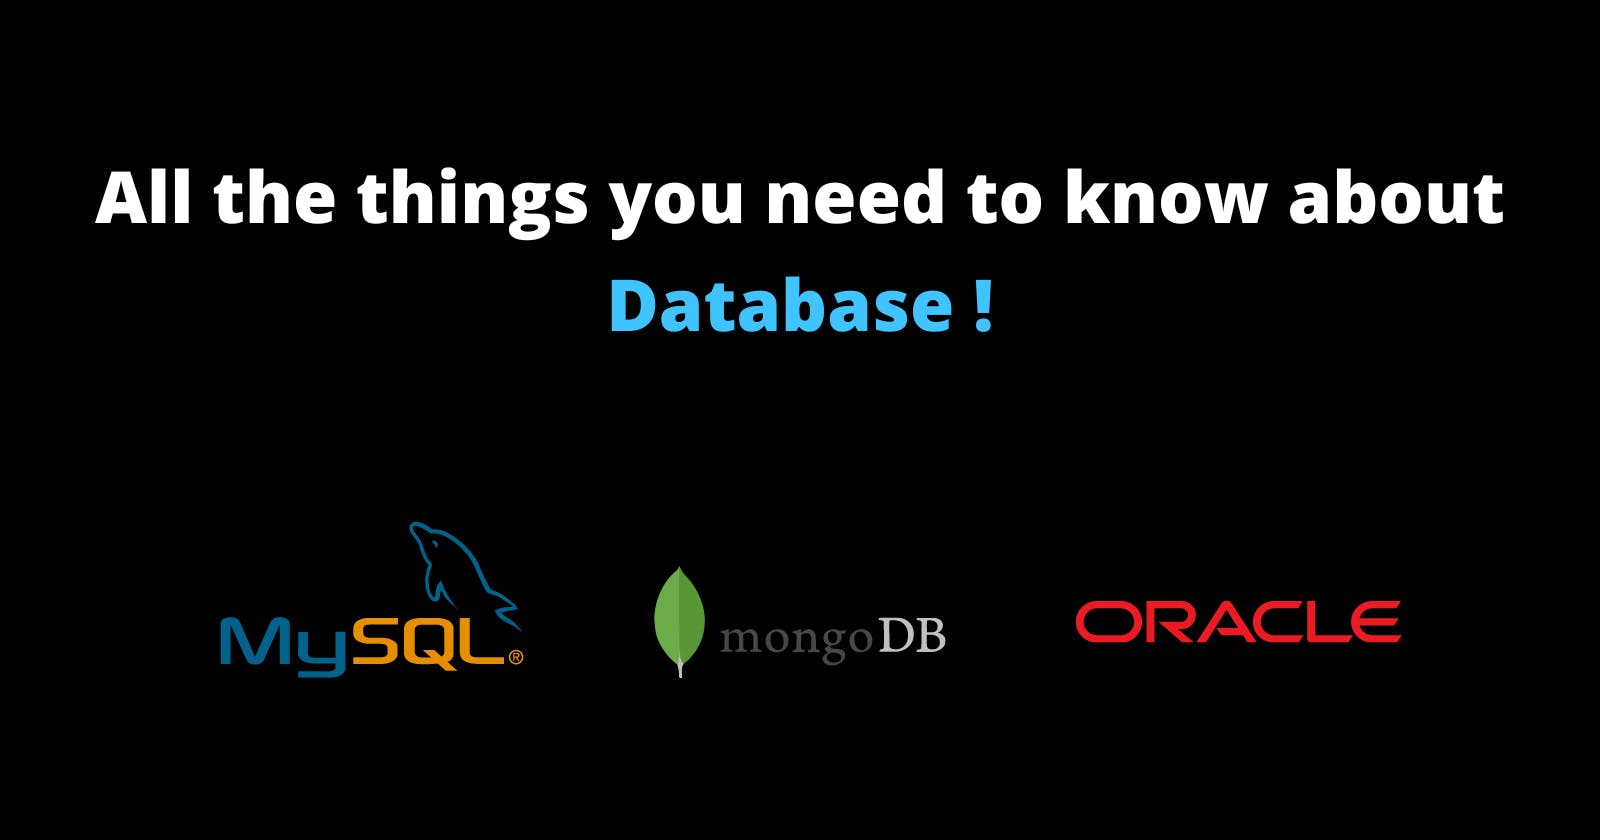 All the things you need to know about database 📰🚀